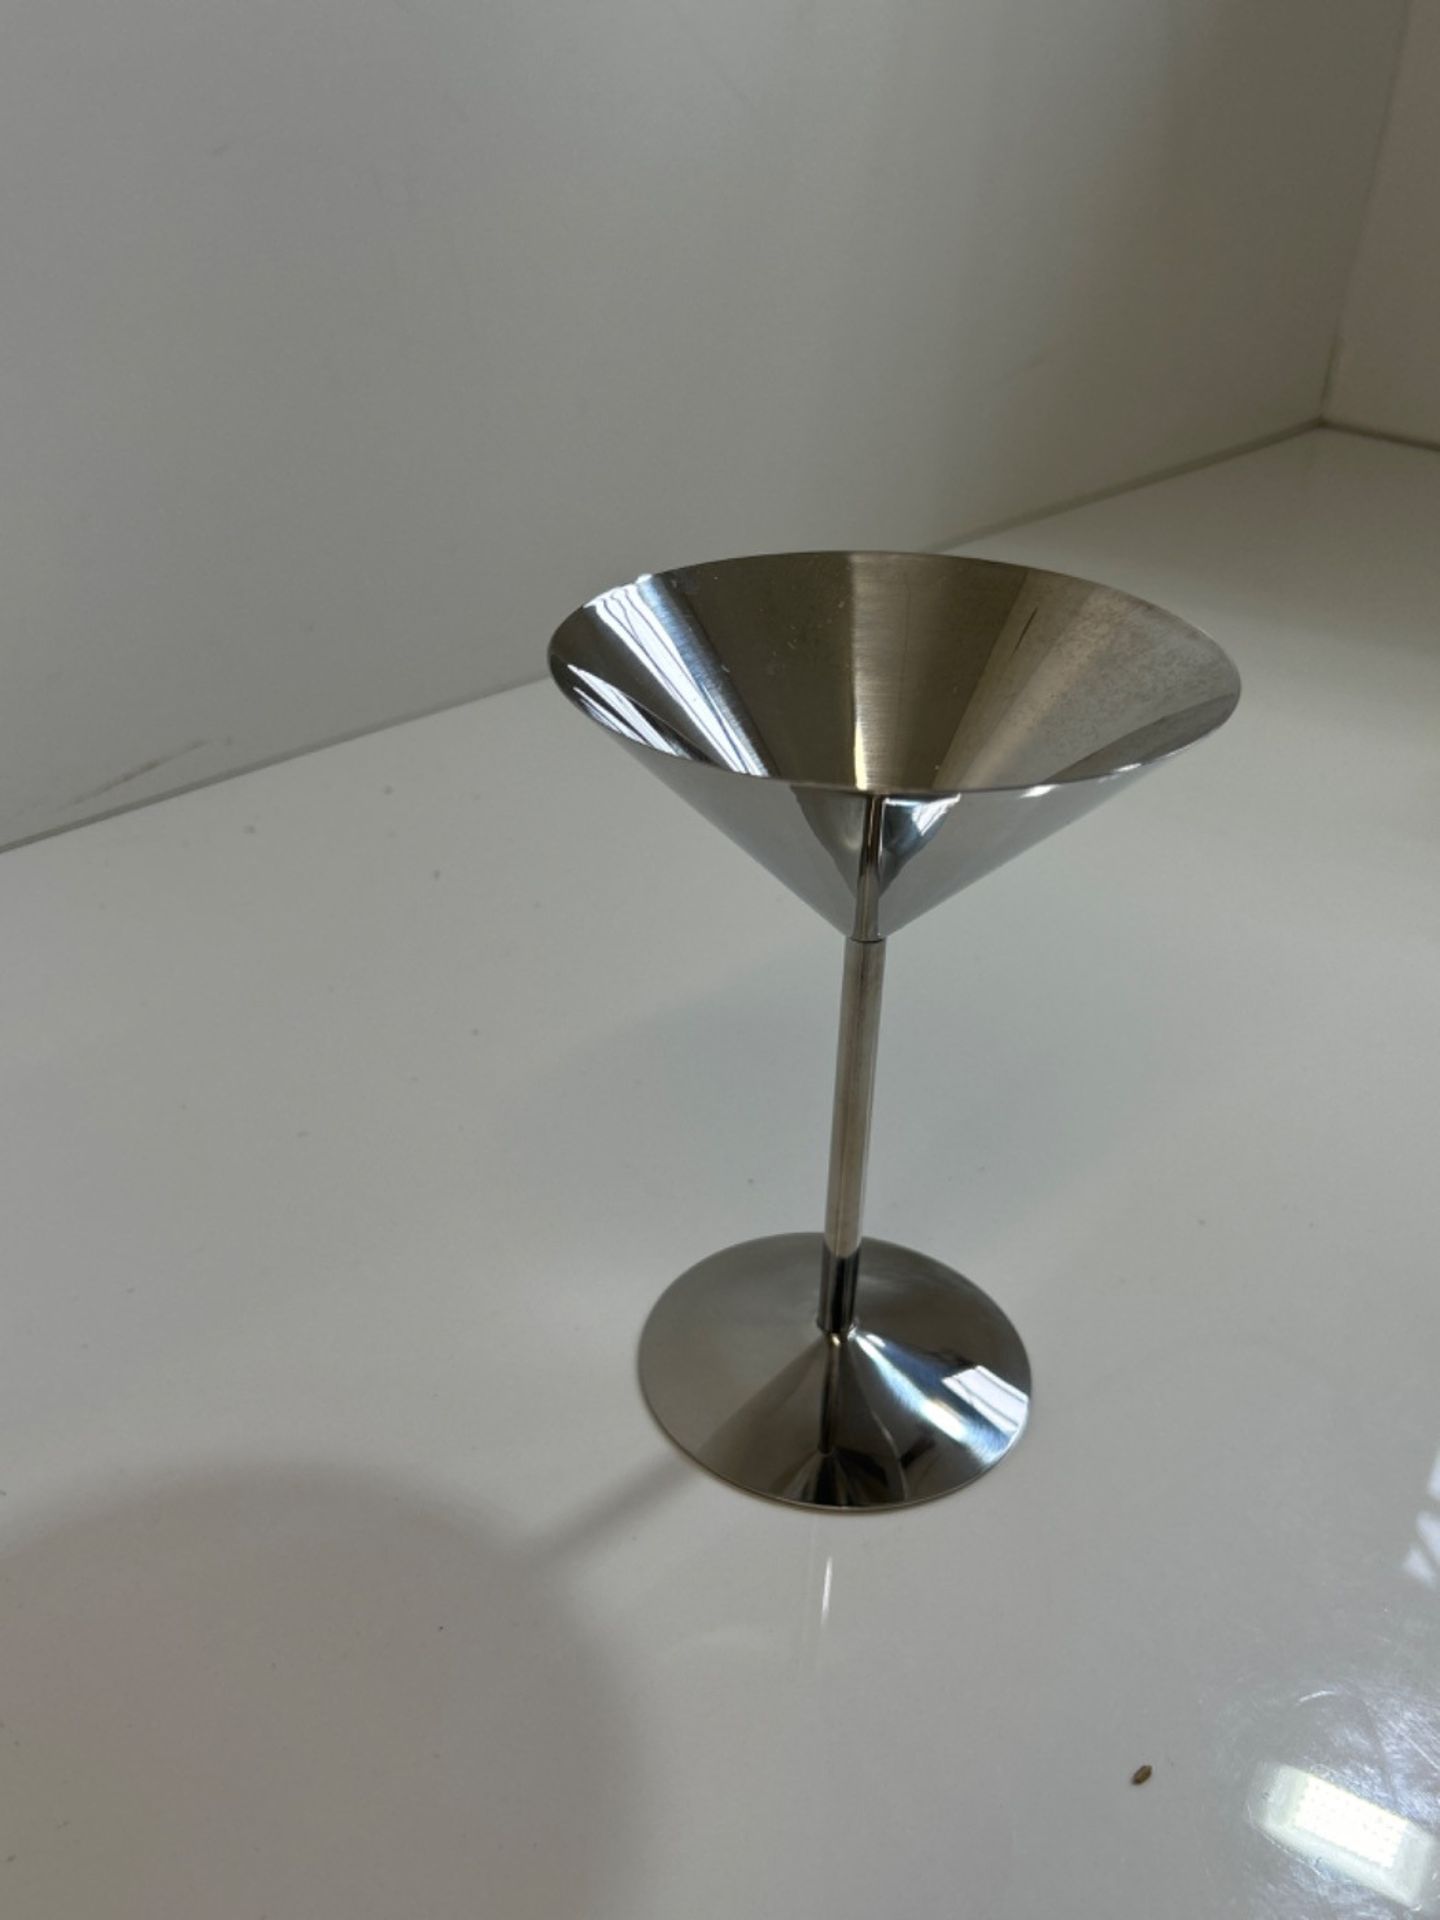 Genware NEV-MRS240 Stainless Steel Martini Glass, 24 cl/8.5 oz. - Image 2 of 3